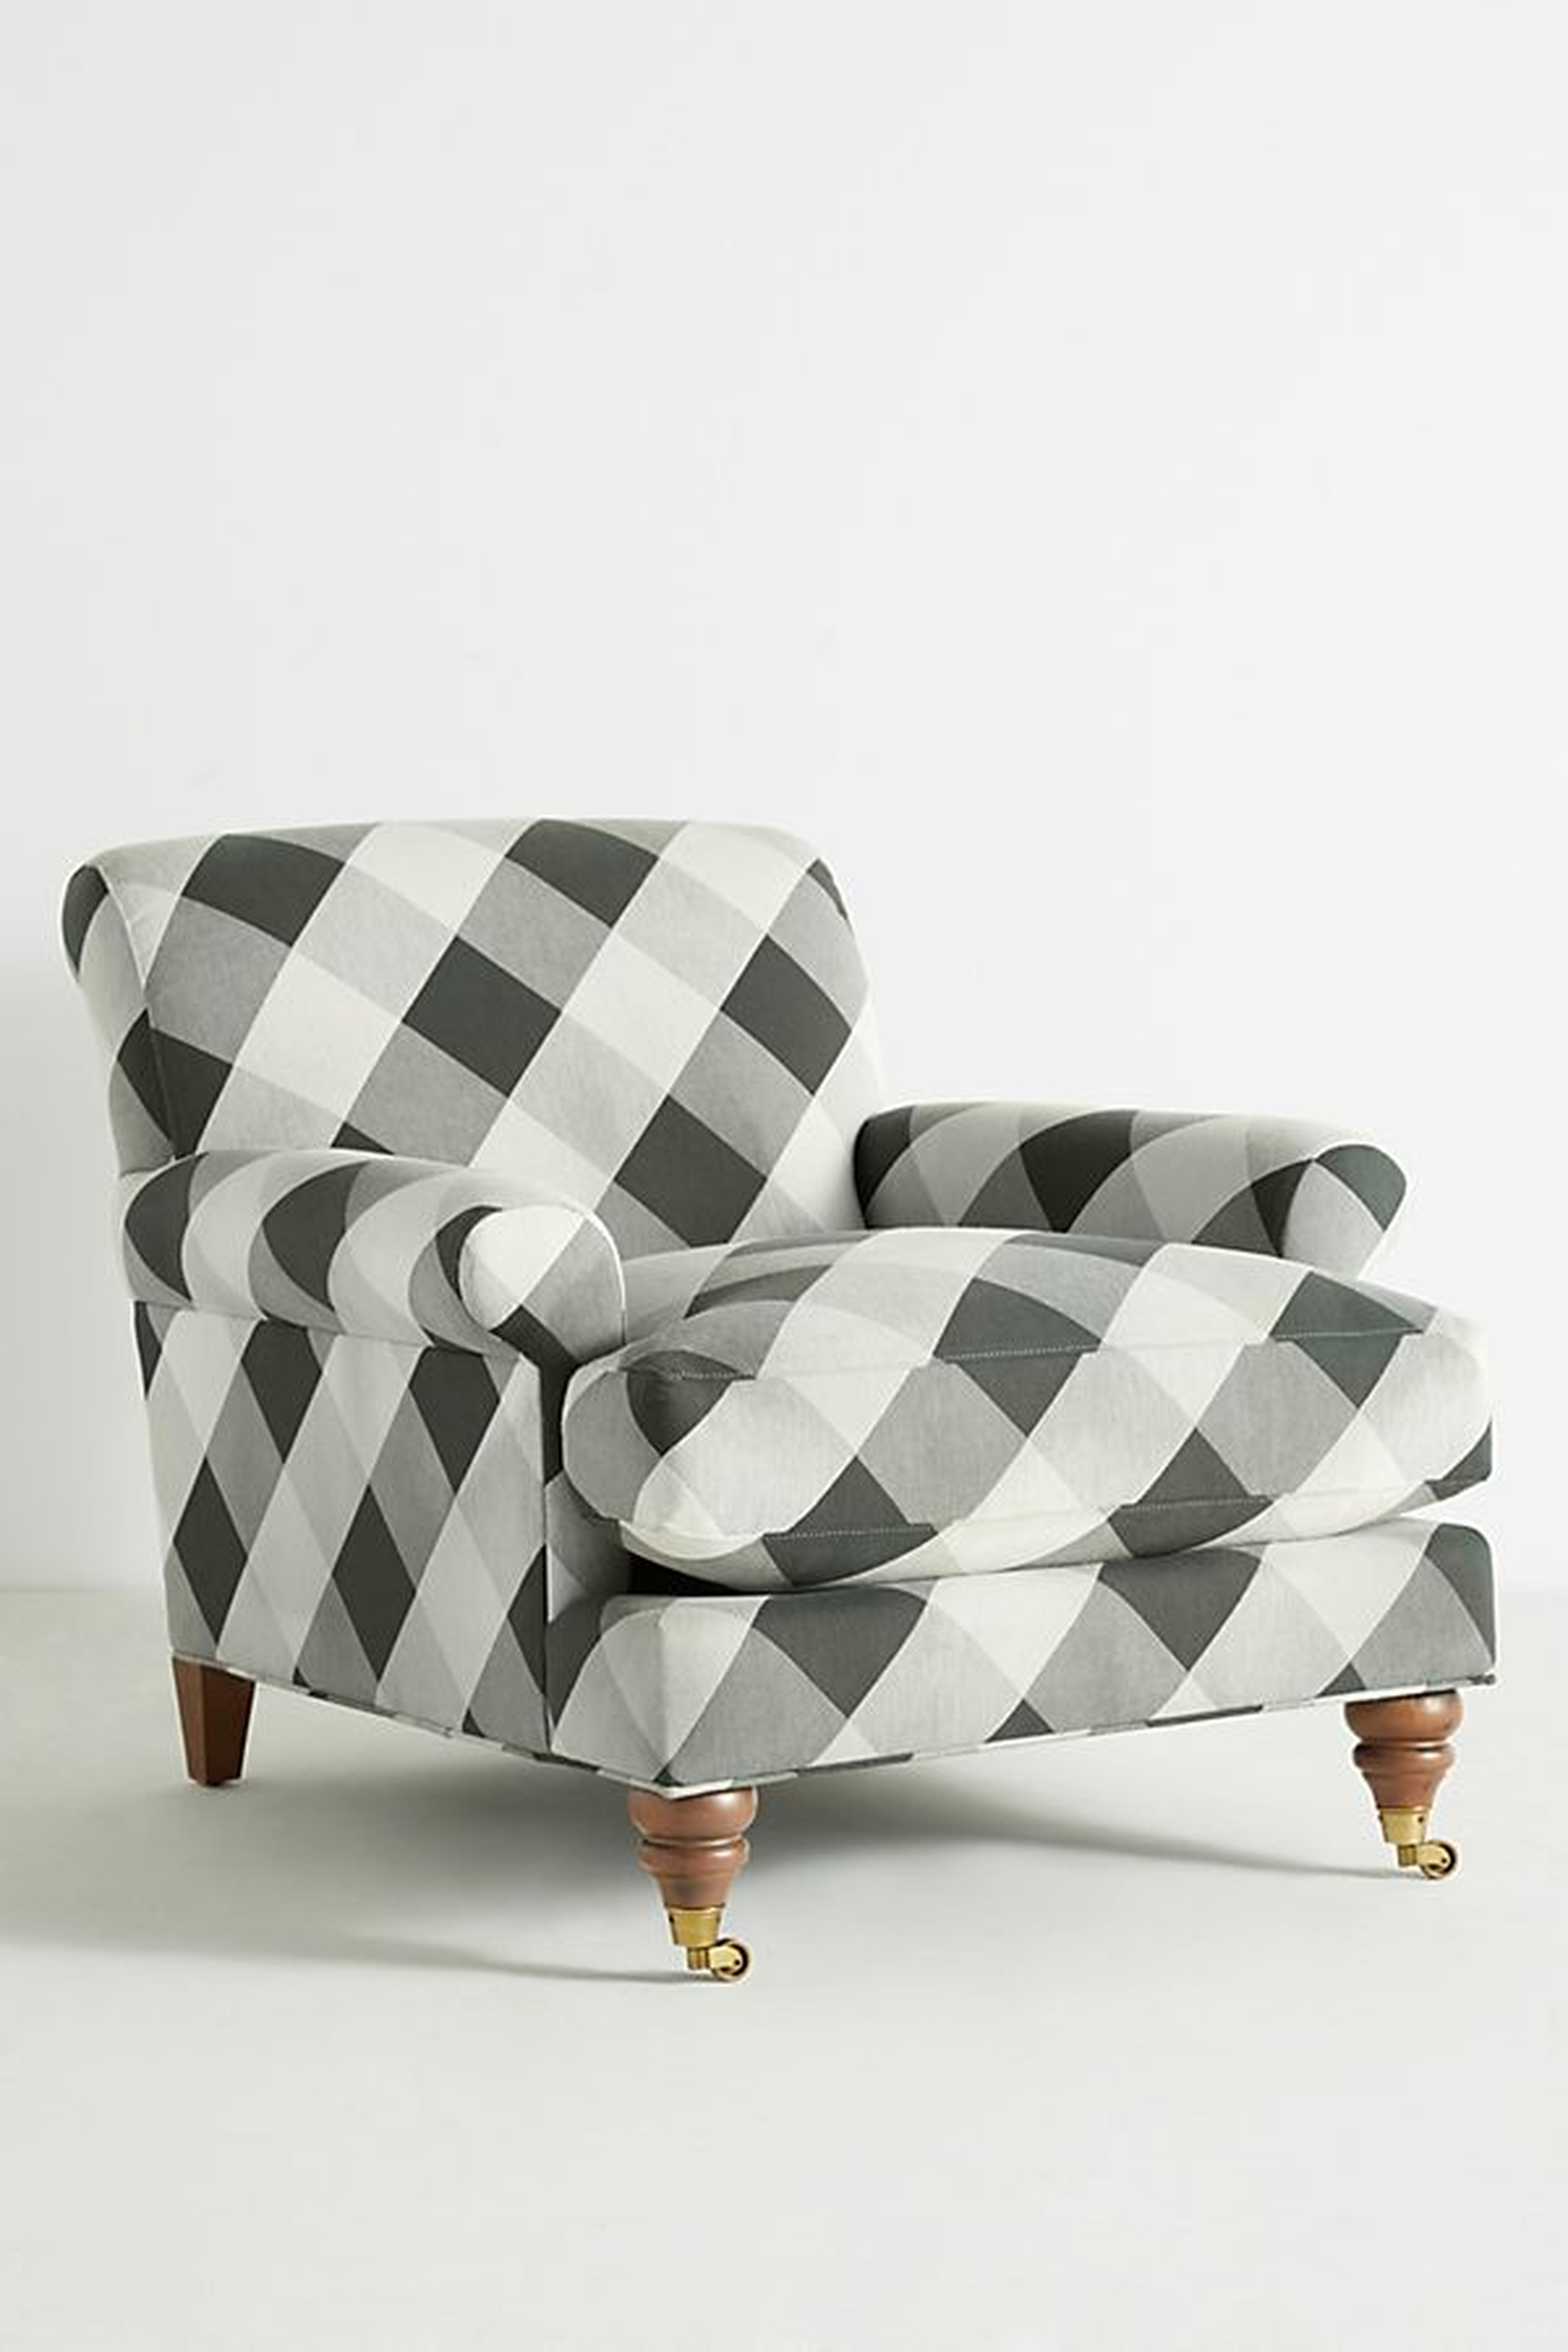 Buffalo Check Willoughby Chair - Anthropologie